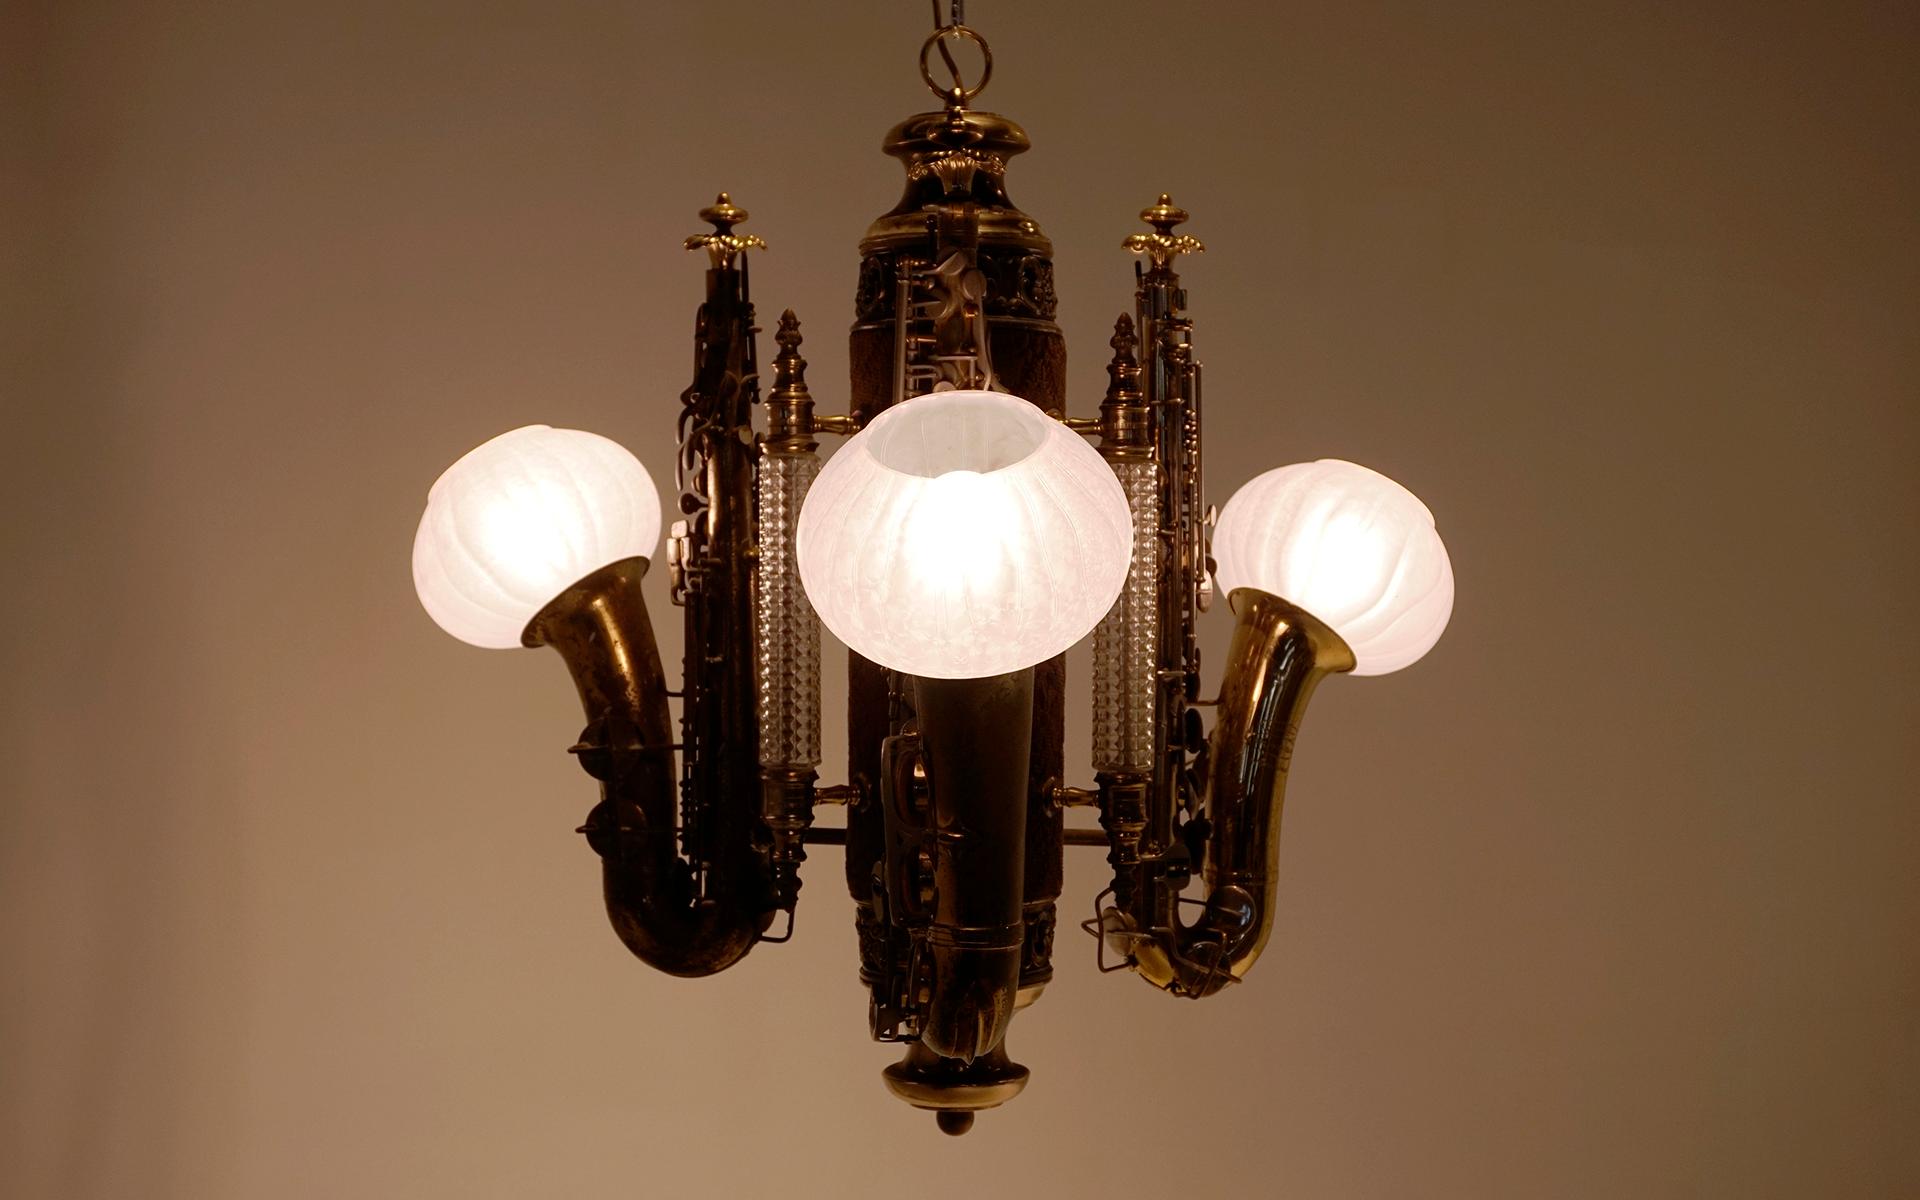 One of a kind super cool custom chandelier made of three brass saxophones and german glass columns and shades. Rich patina to the brass elements. No chips or cracks in any of the glass. Ready to use.